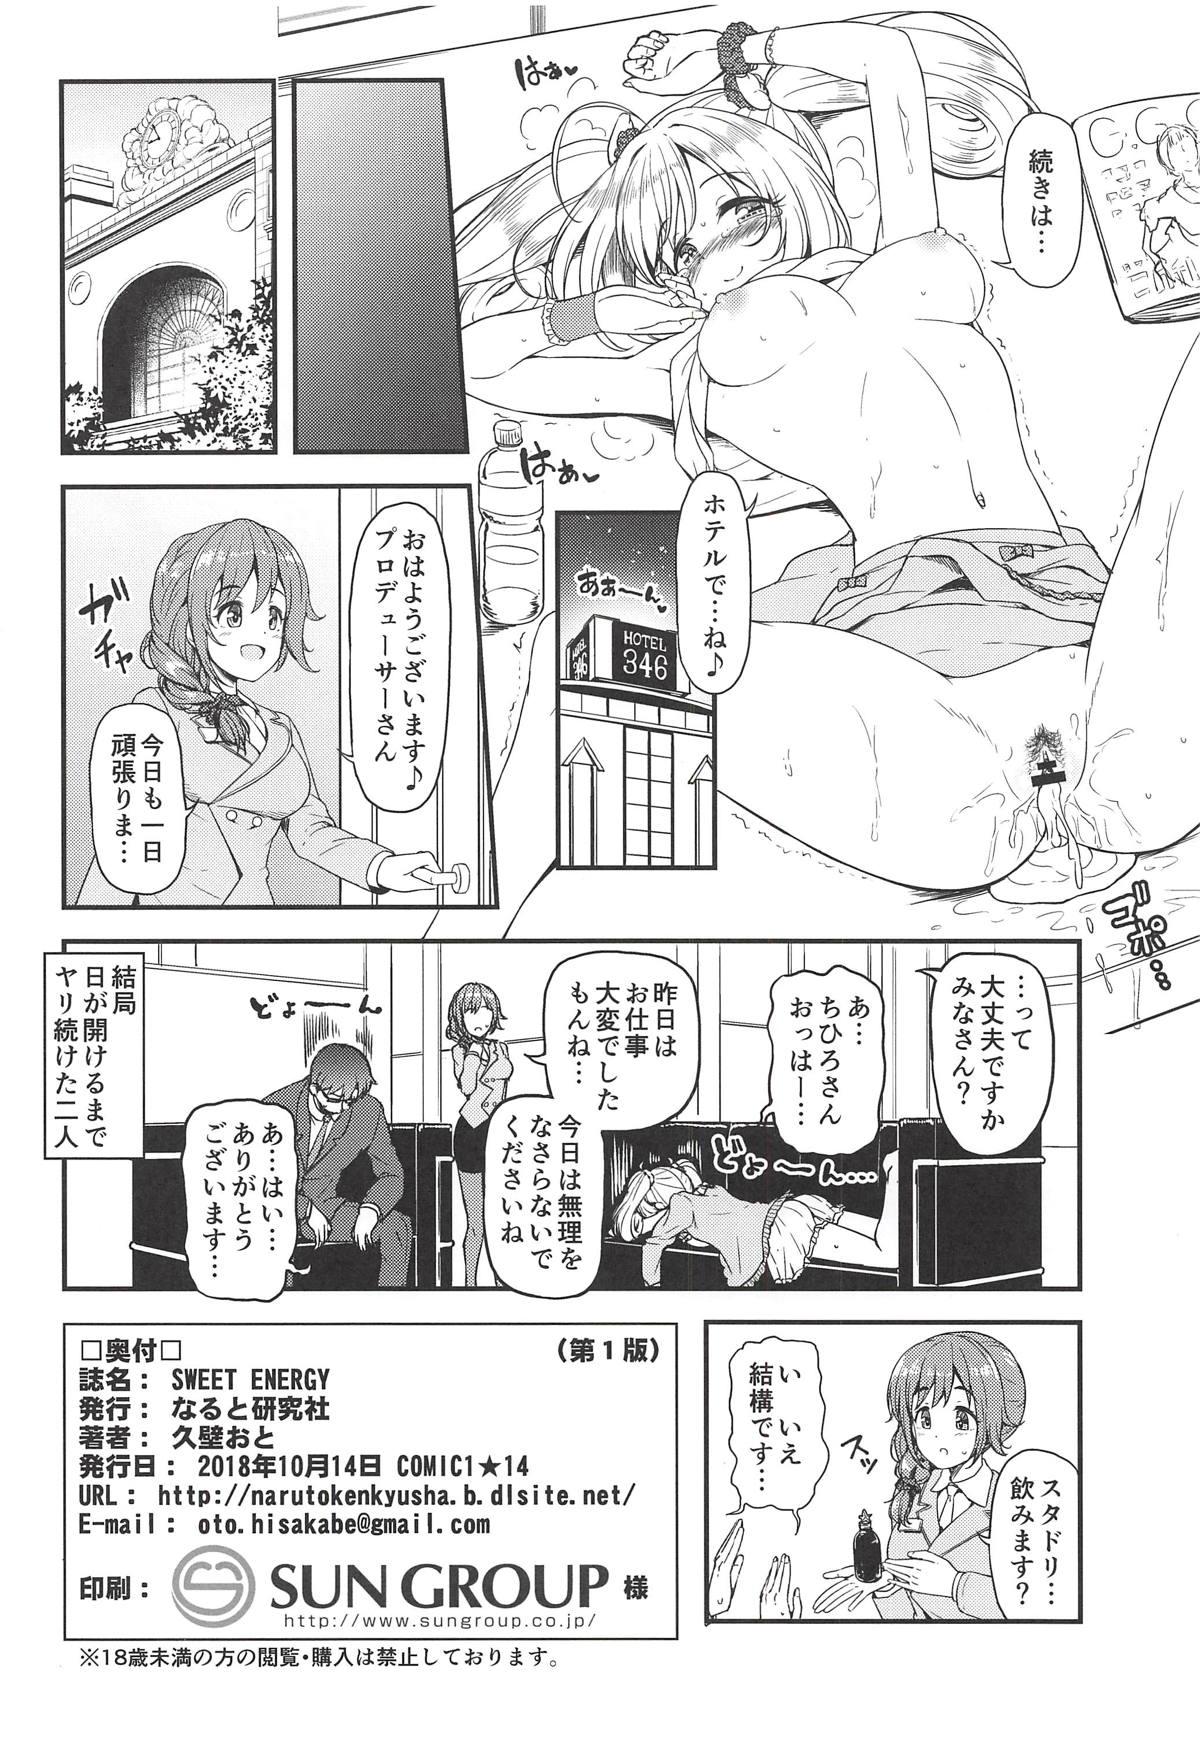 Chacal SWEET ENERGY - The idolmaster Amateur Asian - Page 9